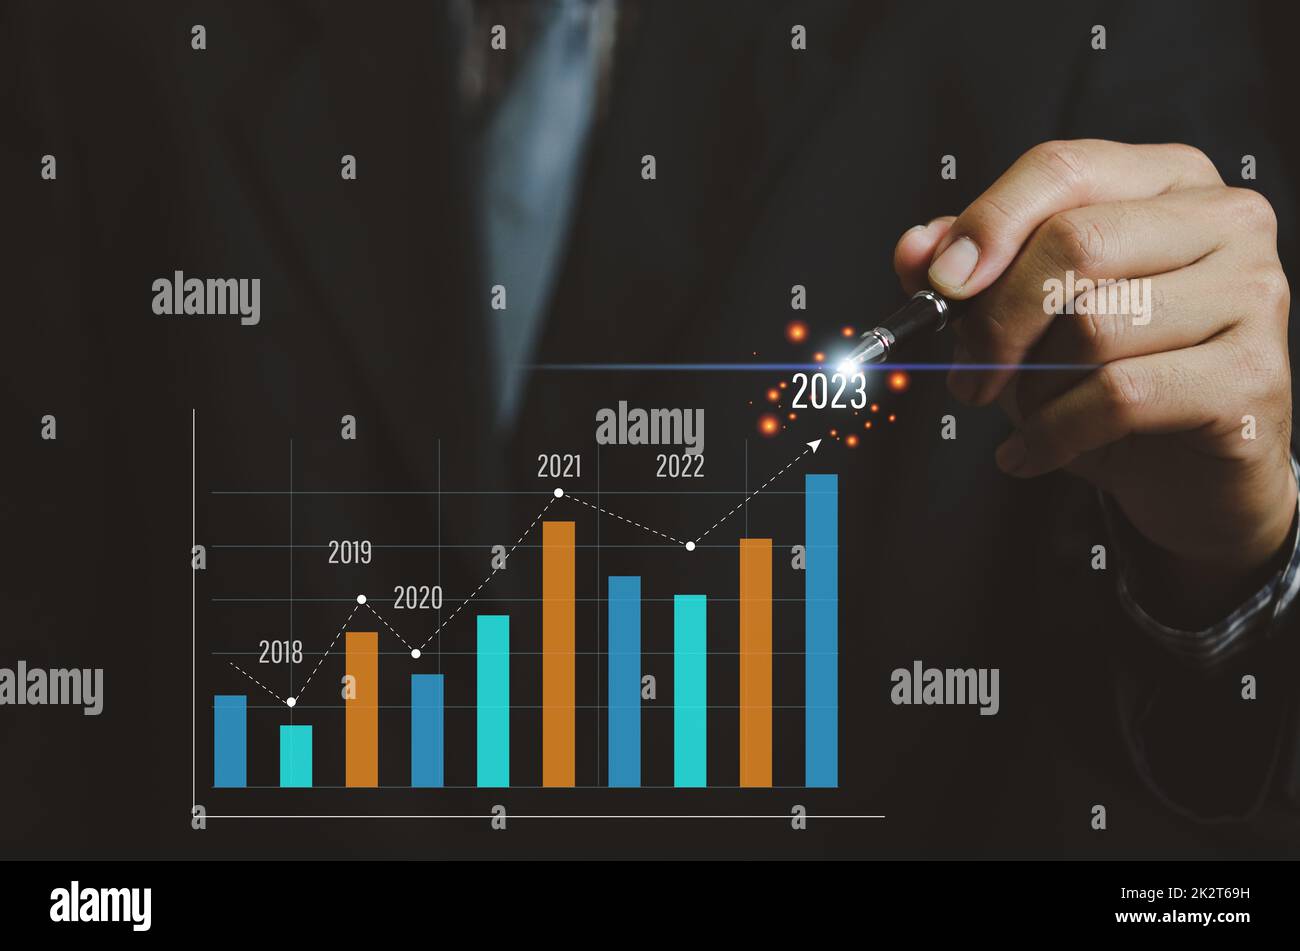 Analysis of business growth trends and company finances Businessman working with virtual screen graph and chart. arrow pointing to 2023 Stock Photo